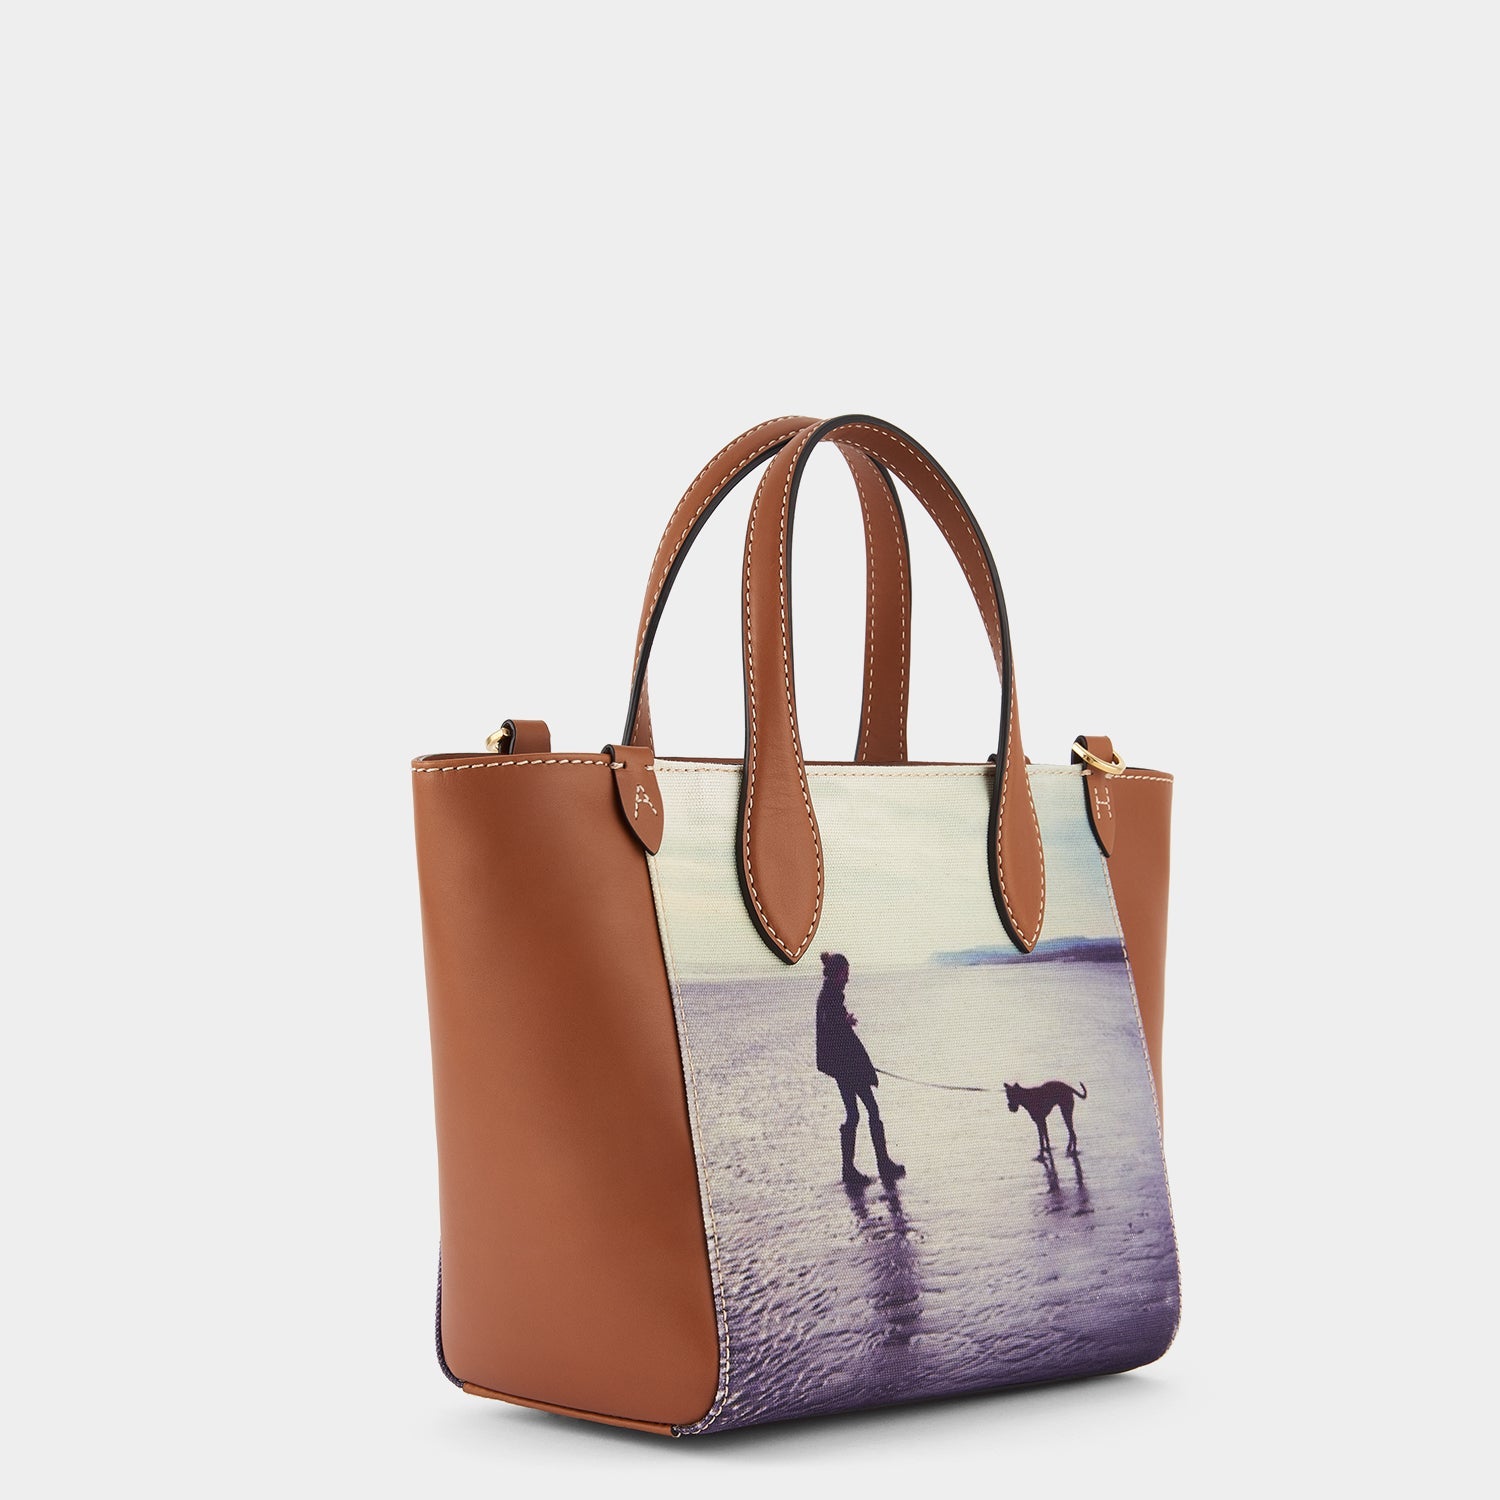 The Strathberry Midi Tote - Top Handle Leather Tote Bag - Tan